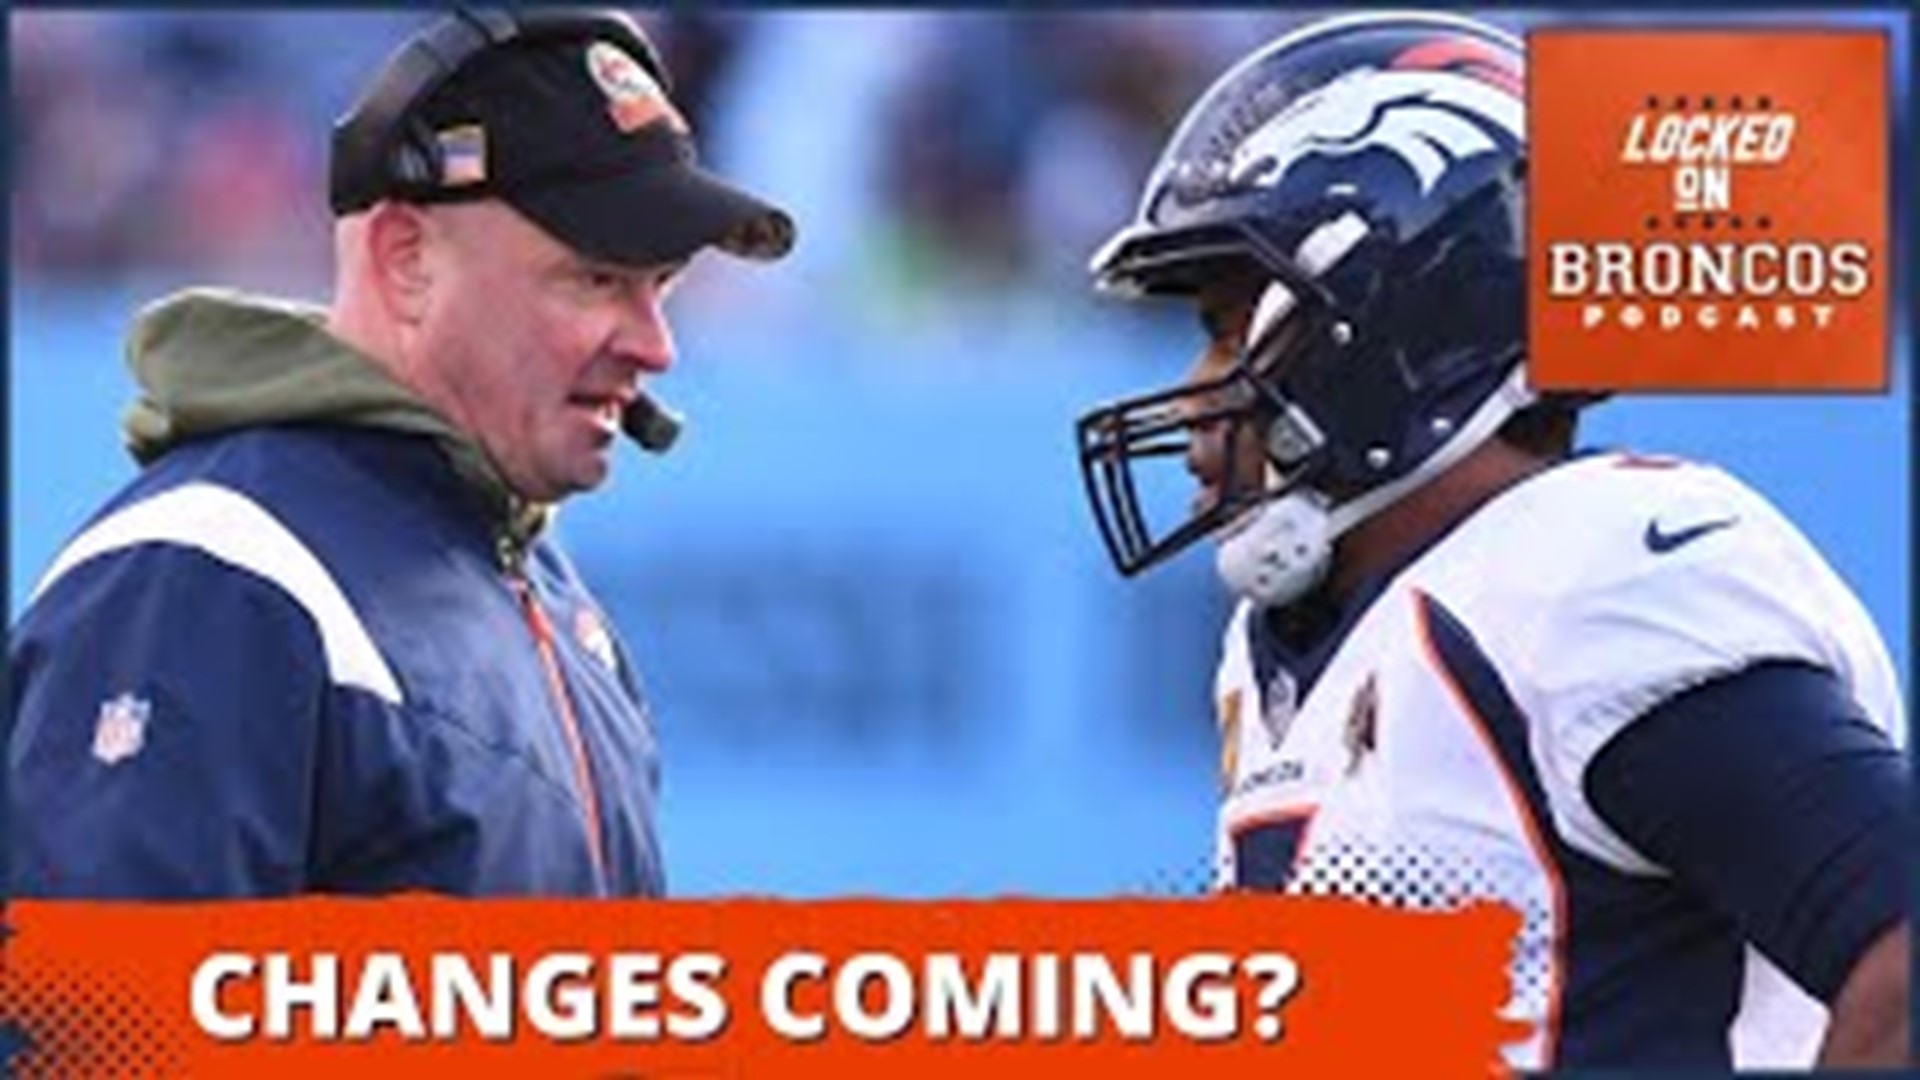 How big is Sunday's matchup for fans in Broncos Country and how it impacts potential attendance going forward?